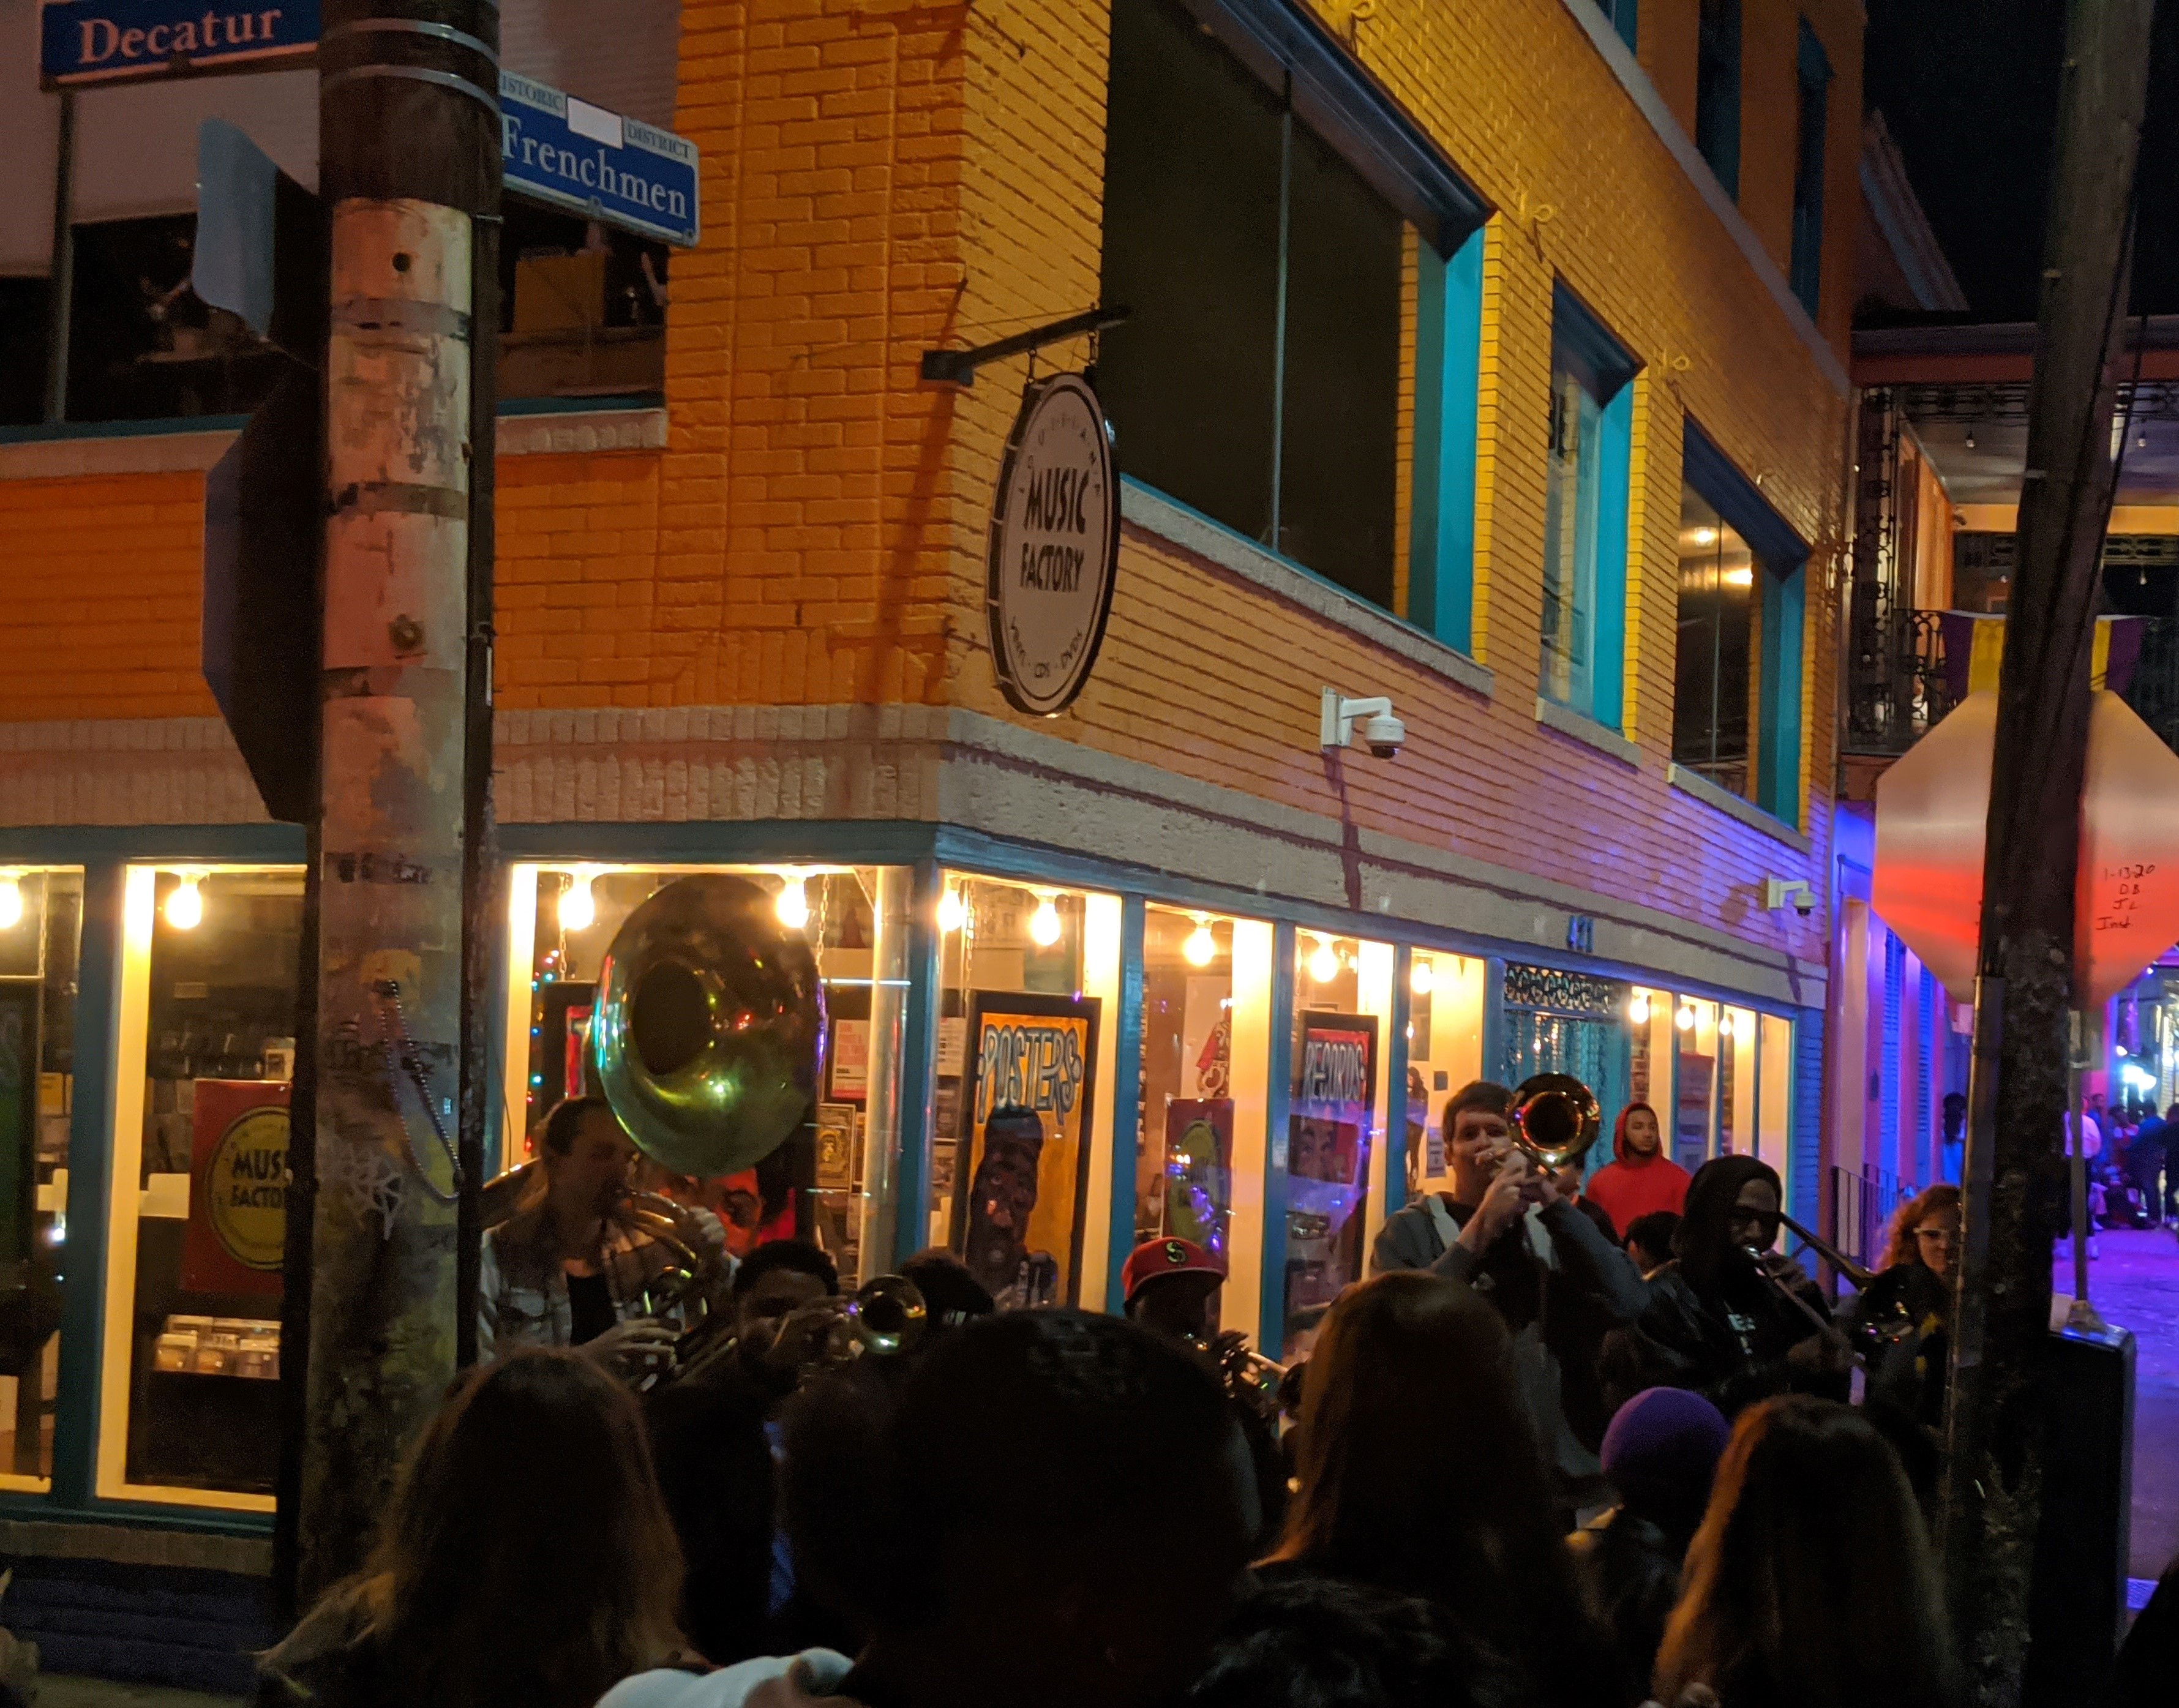 Travel Blog - Jazz musicians playing live on Frenchmen Street in New Orleans on the evening of Fat Tuesday